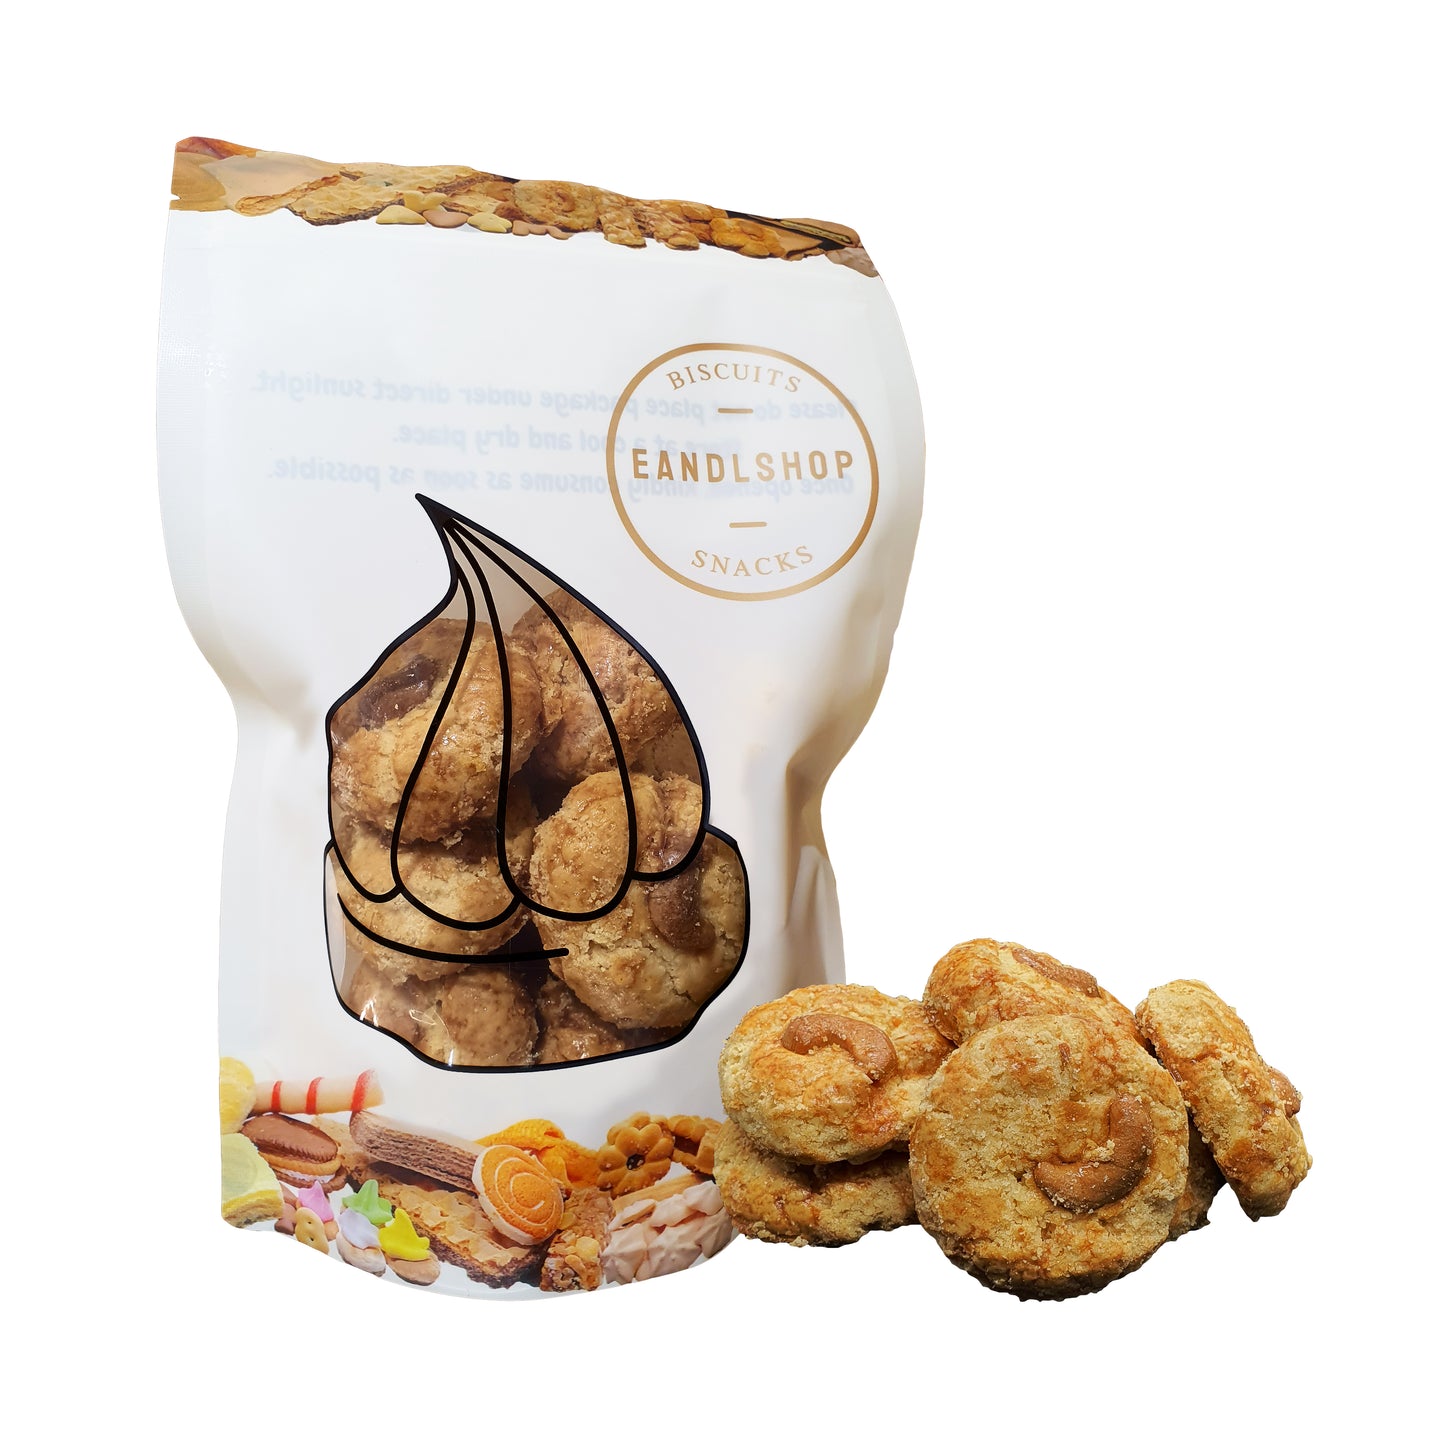 Cashew Nuts Cookies. Old-school biscuits, modern snacks (chips, crackers), cakes, gummies, plums, dried fruits, nuts, herbal tea – available at www.EANDLSHOP.com